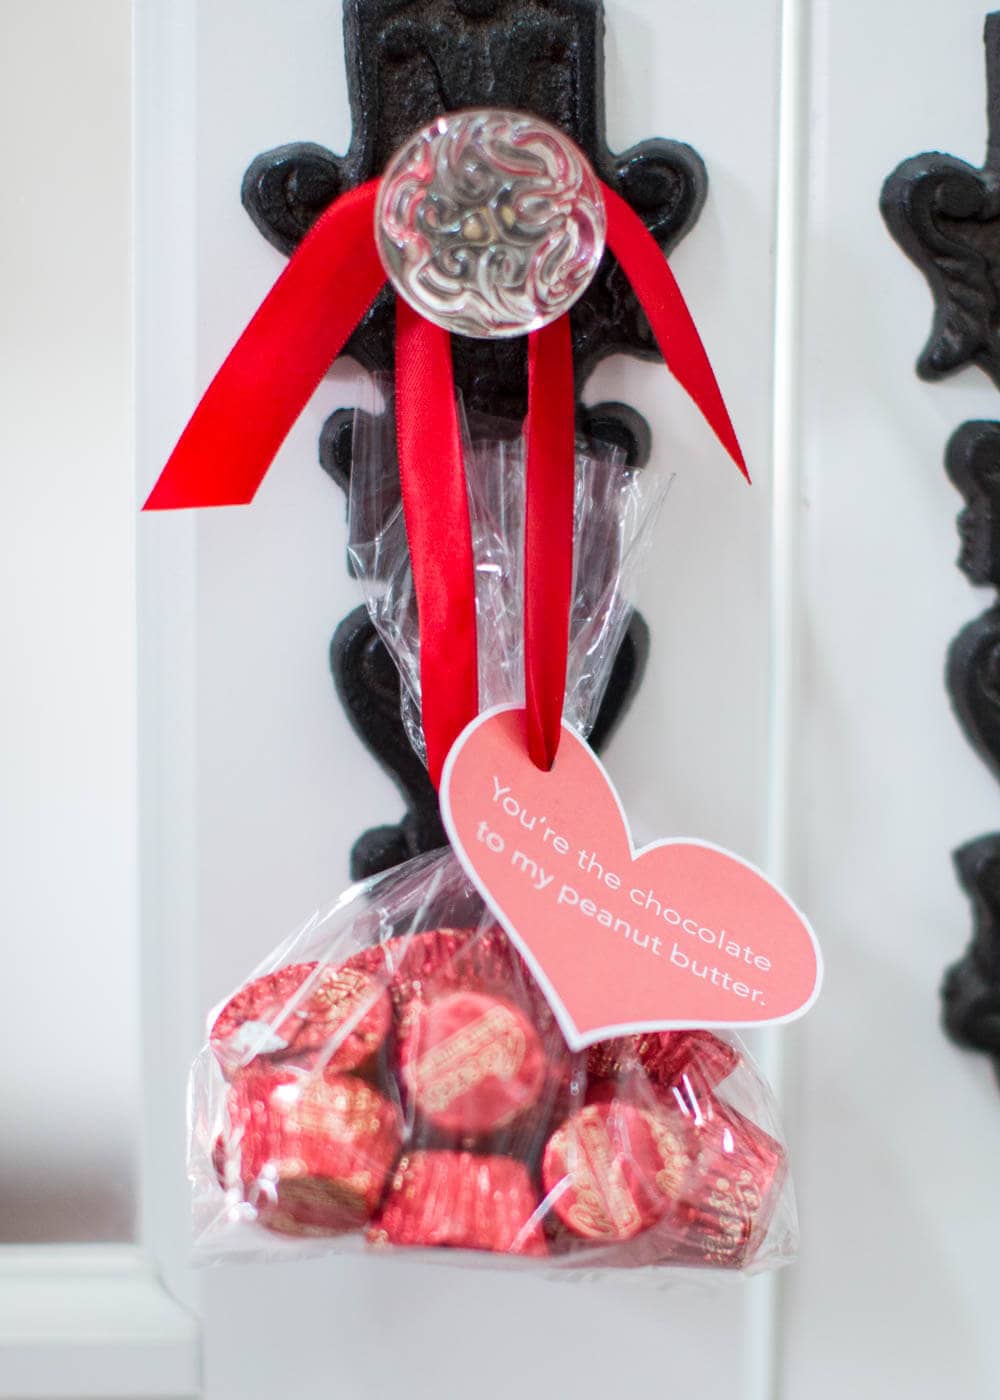 Reese's Valentine Printables - download for free for a cute and easy Valentine's gift!